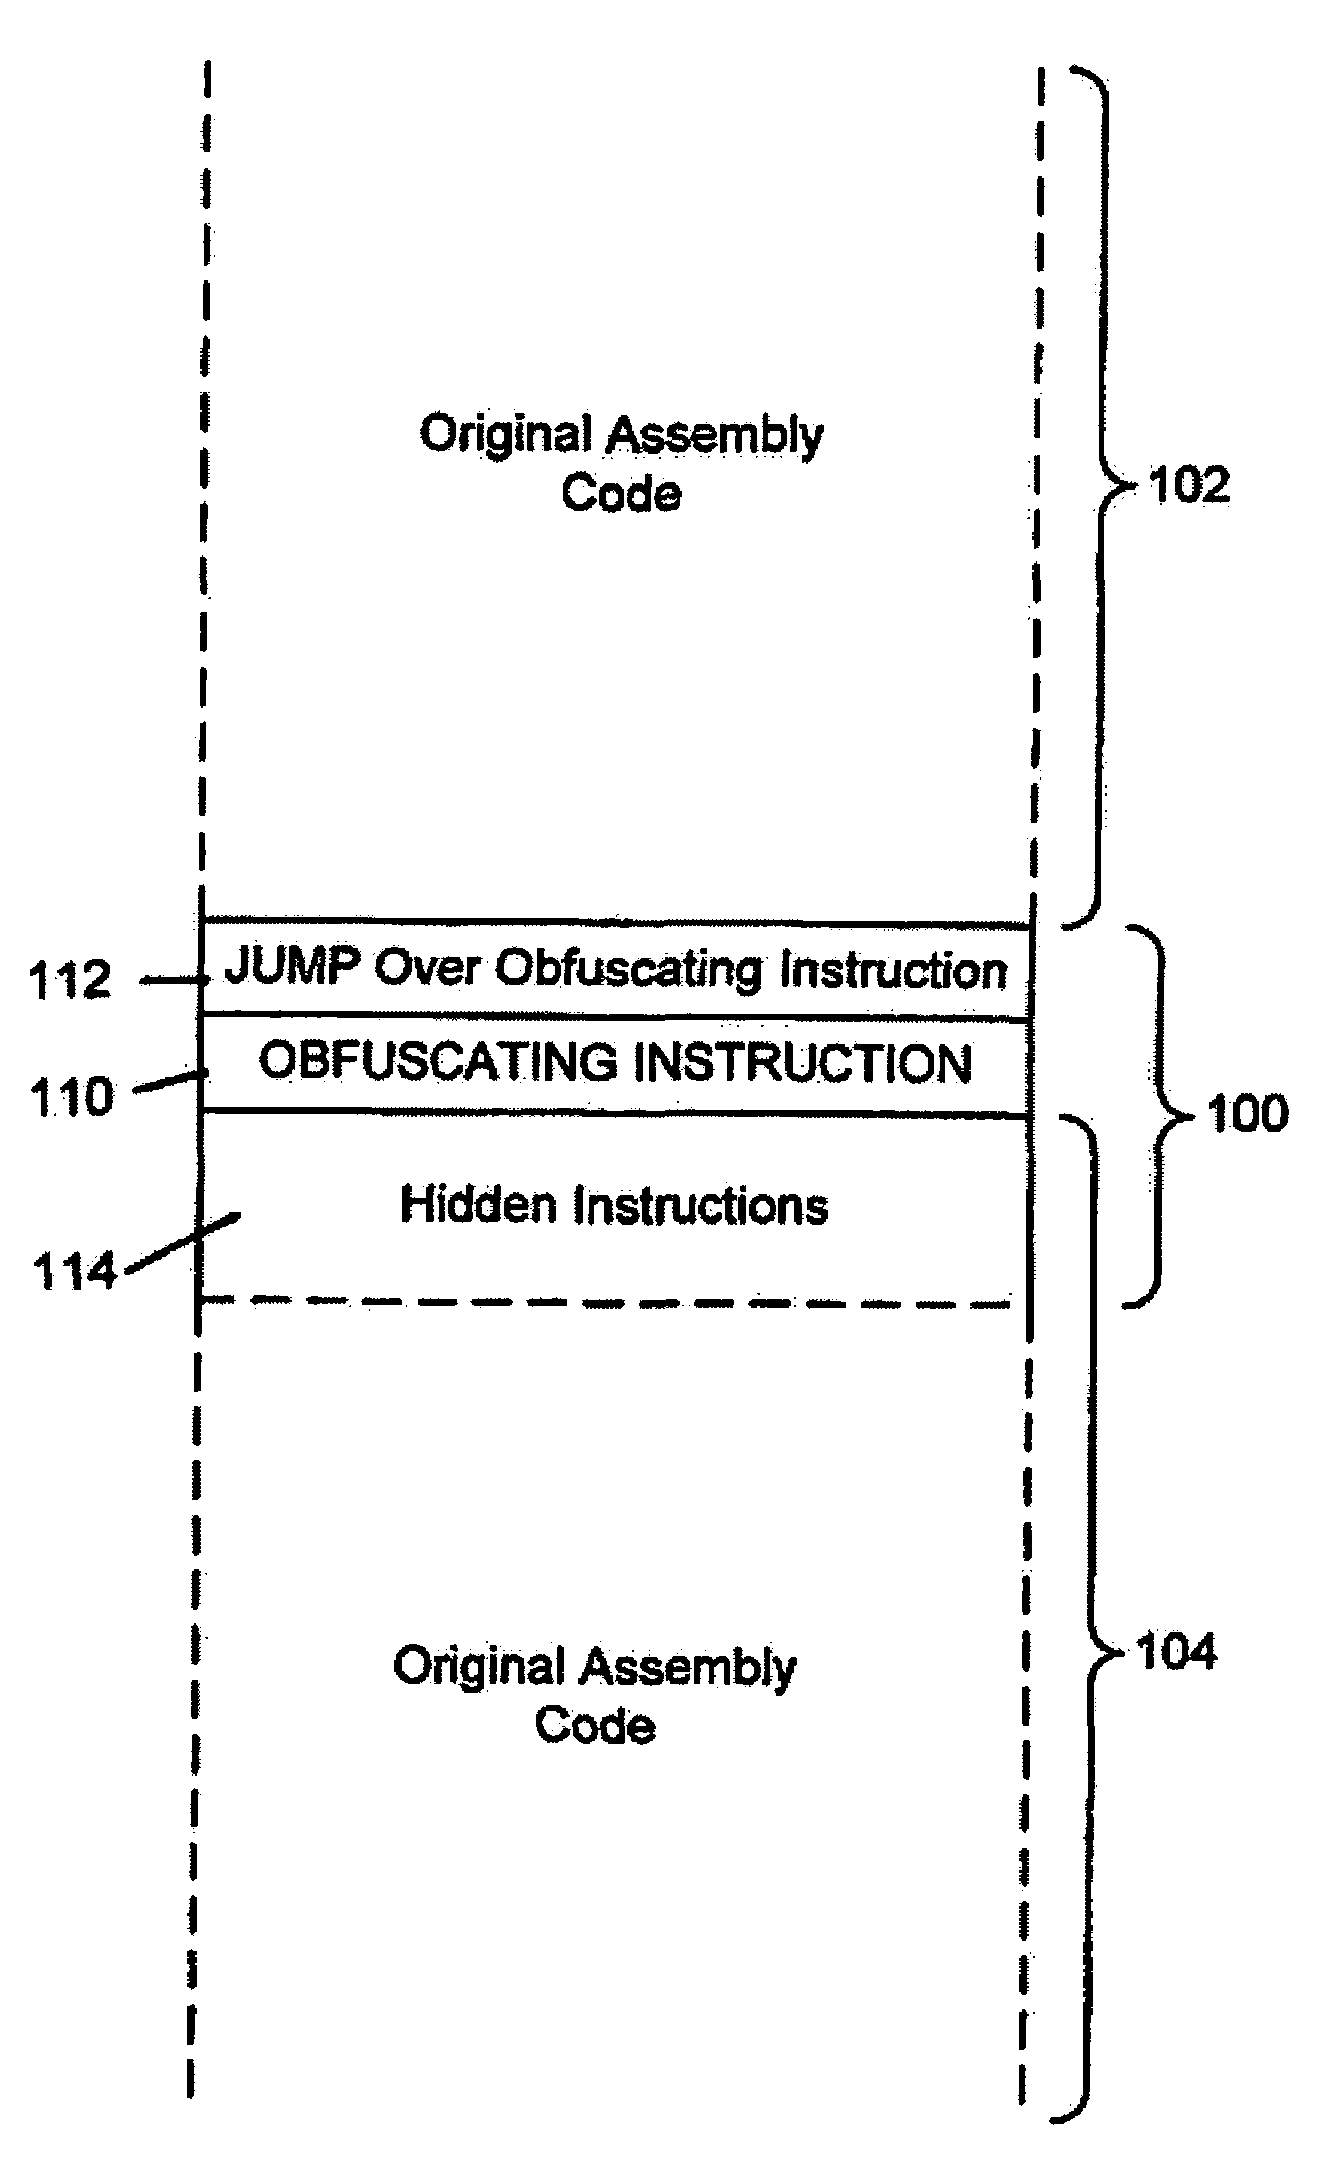 System for obfuscating computer code upon disassembly